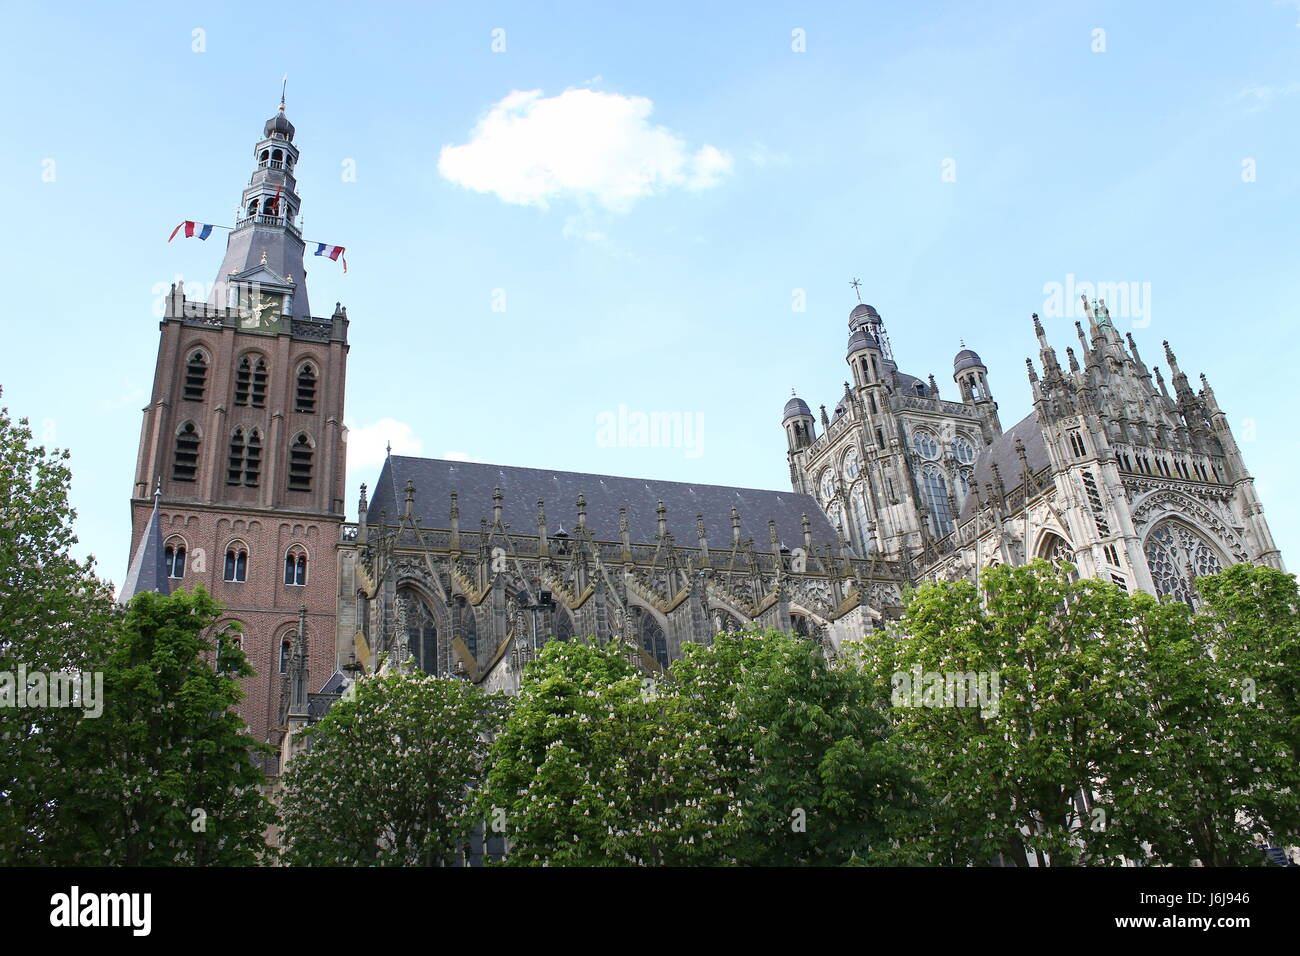 Medieval Sint-Janskathedraal (St. John's Cathedral). City of  Den Bosch, Brabant, Netherlands, seen from Parade square. Brabantine Gothic style Stock Photo